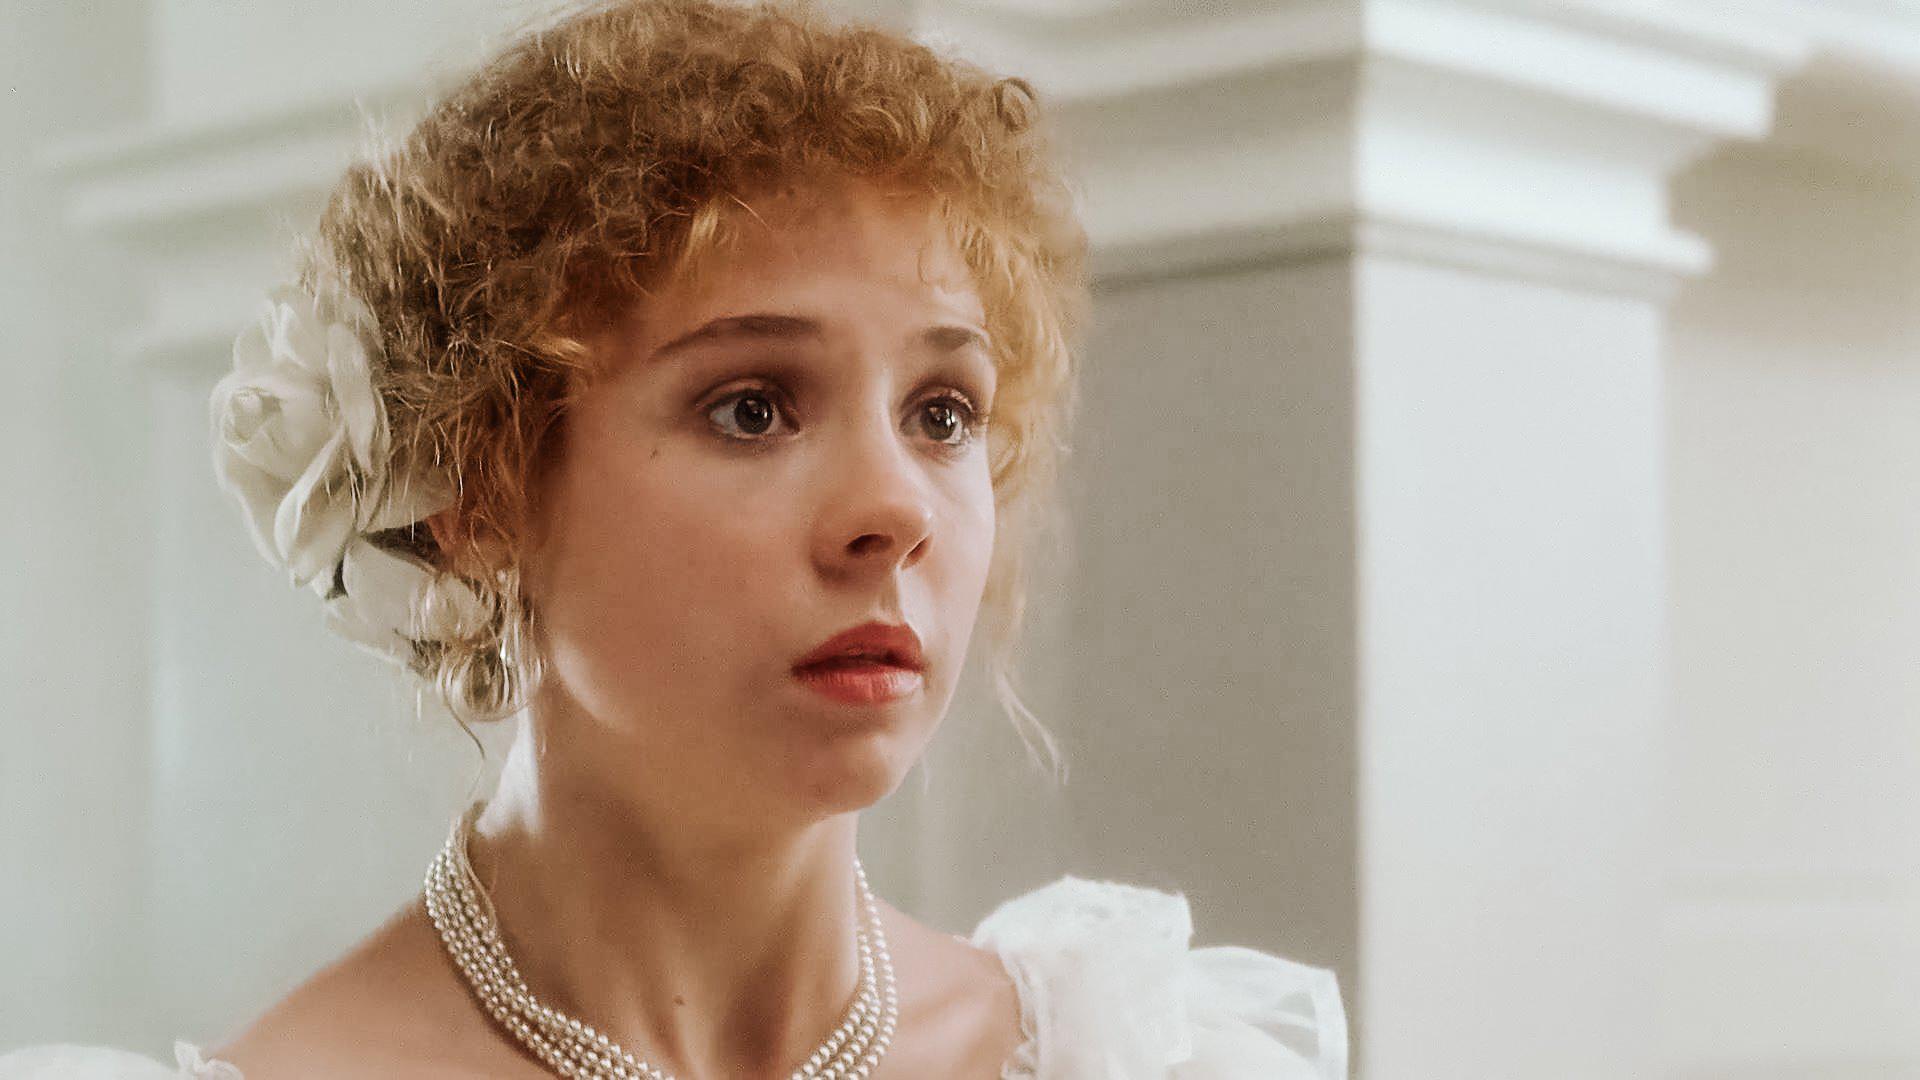 Anne Shirley's Pearl Necklace